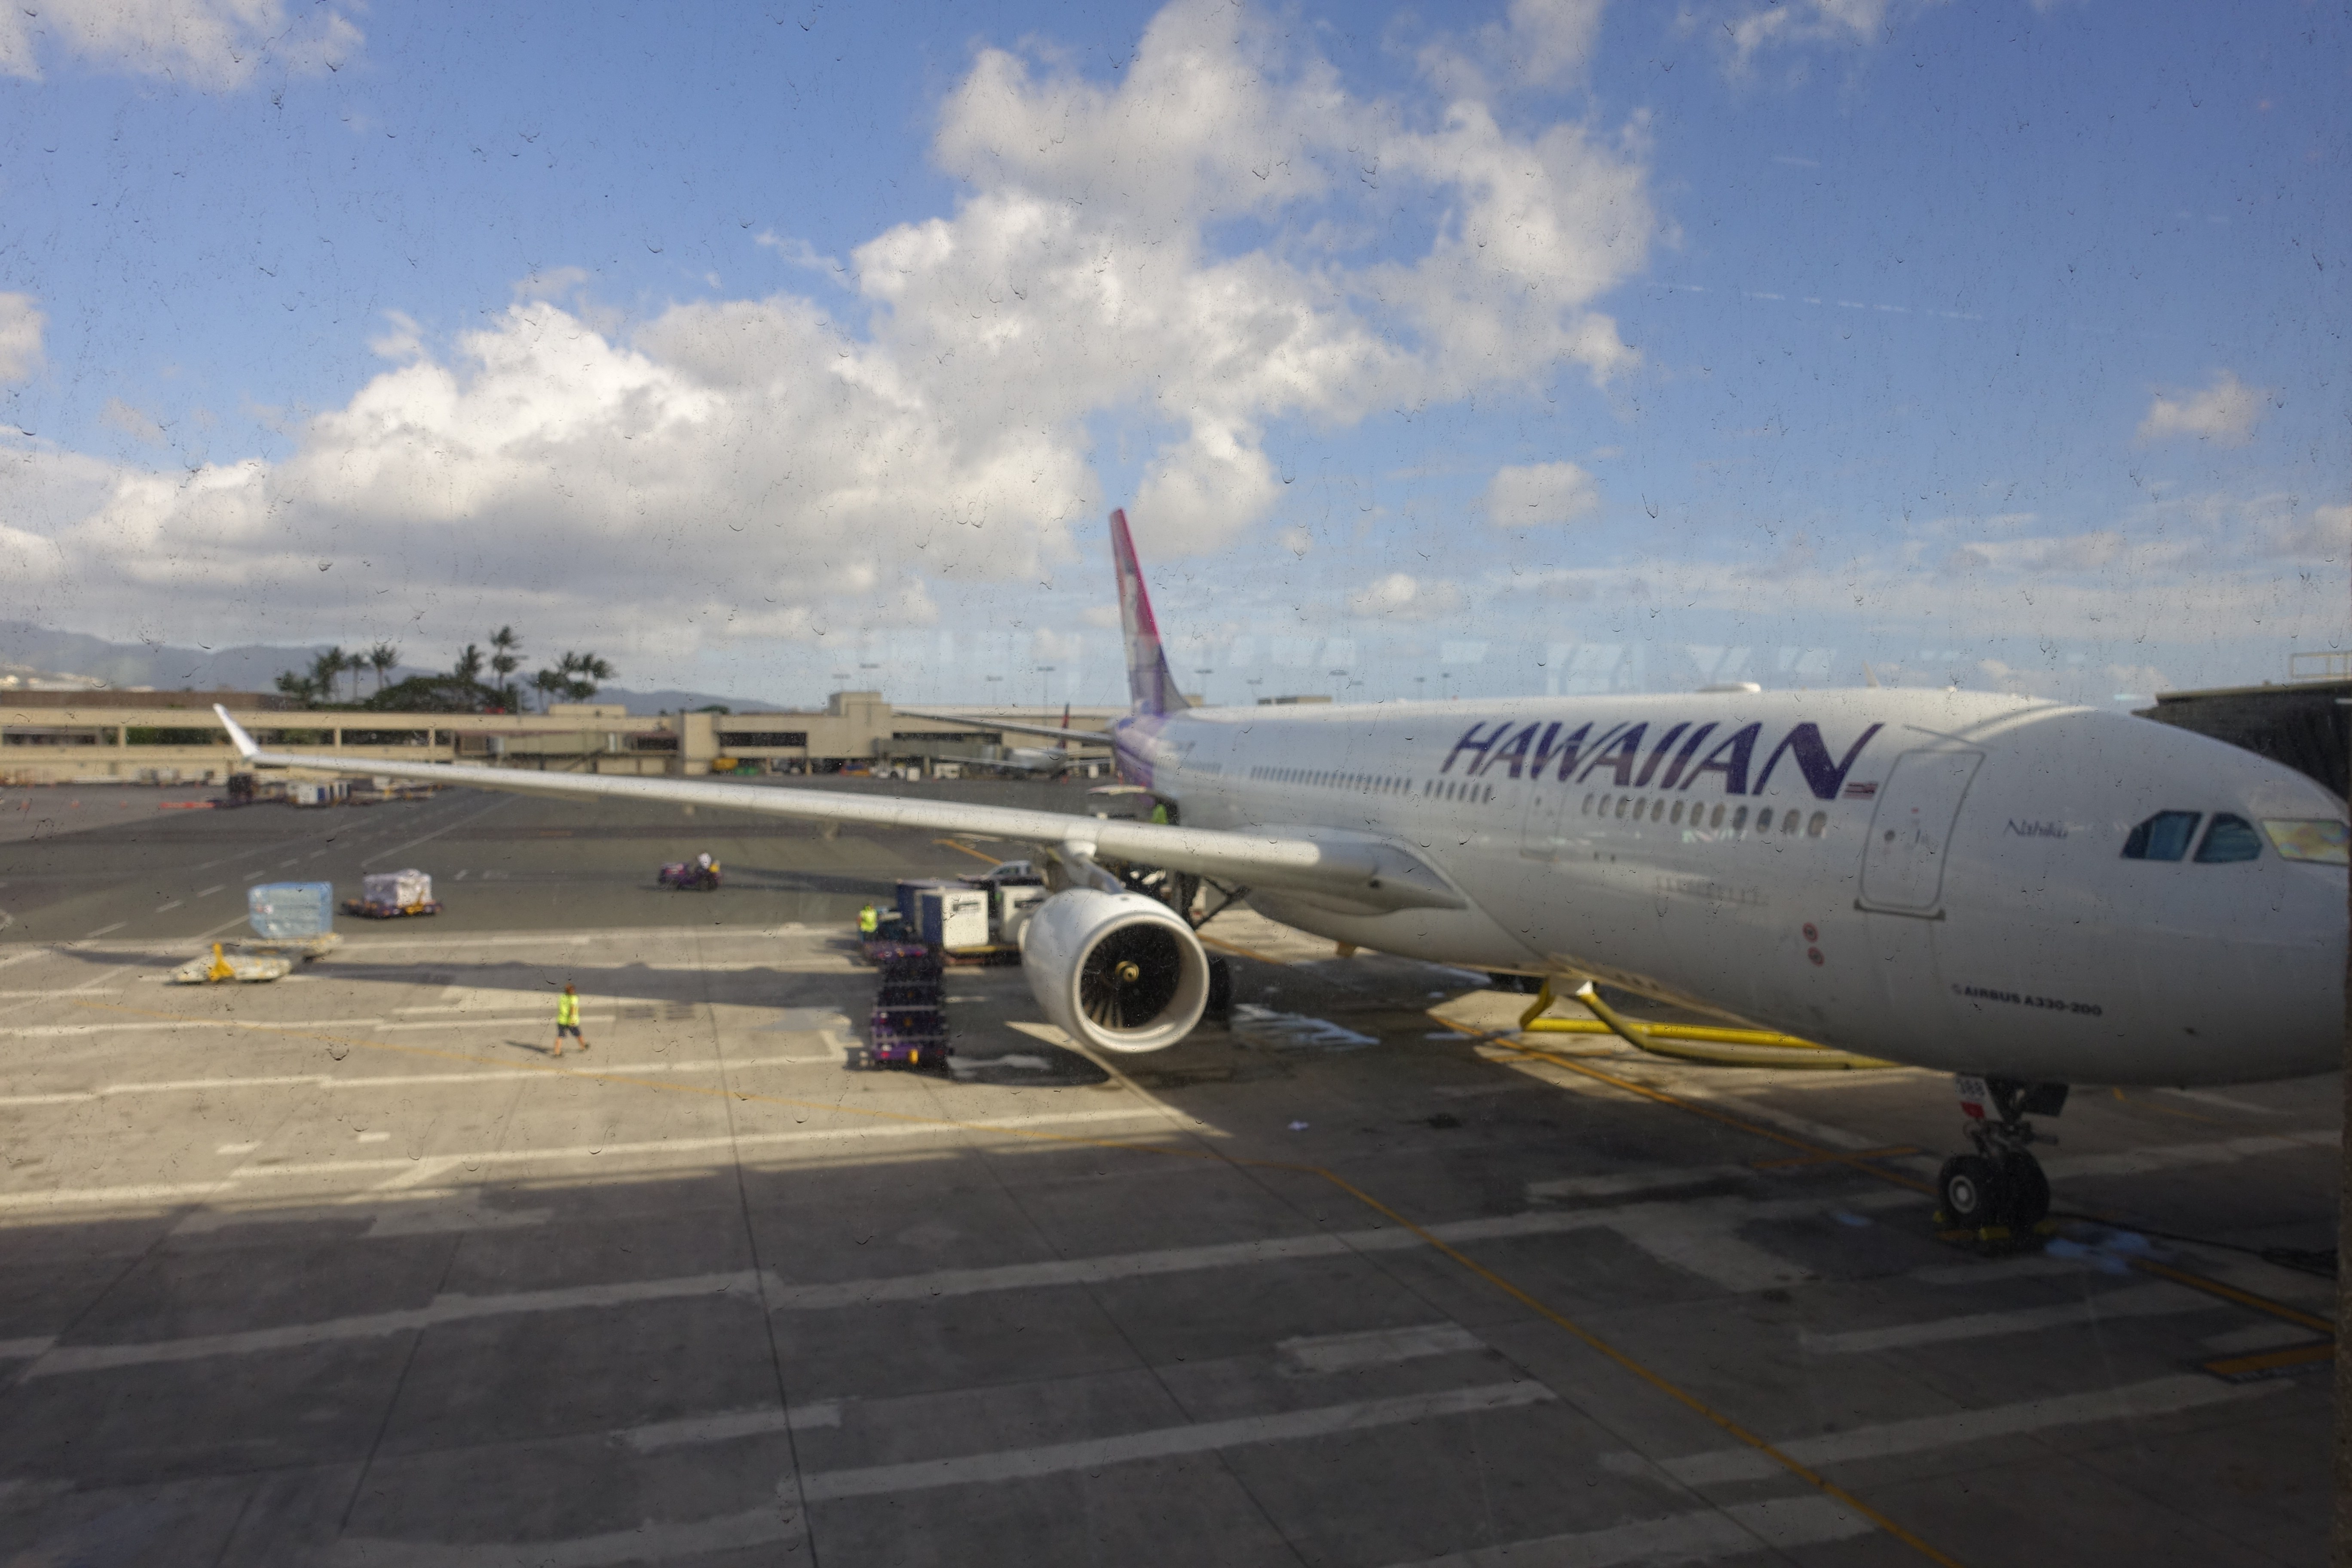 News Update Hawaiian Airlines 330 - 32 cent hot dogs - More